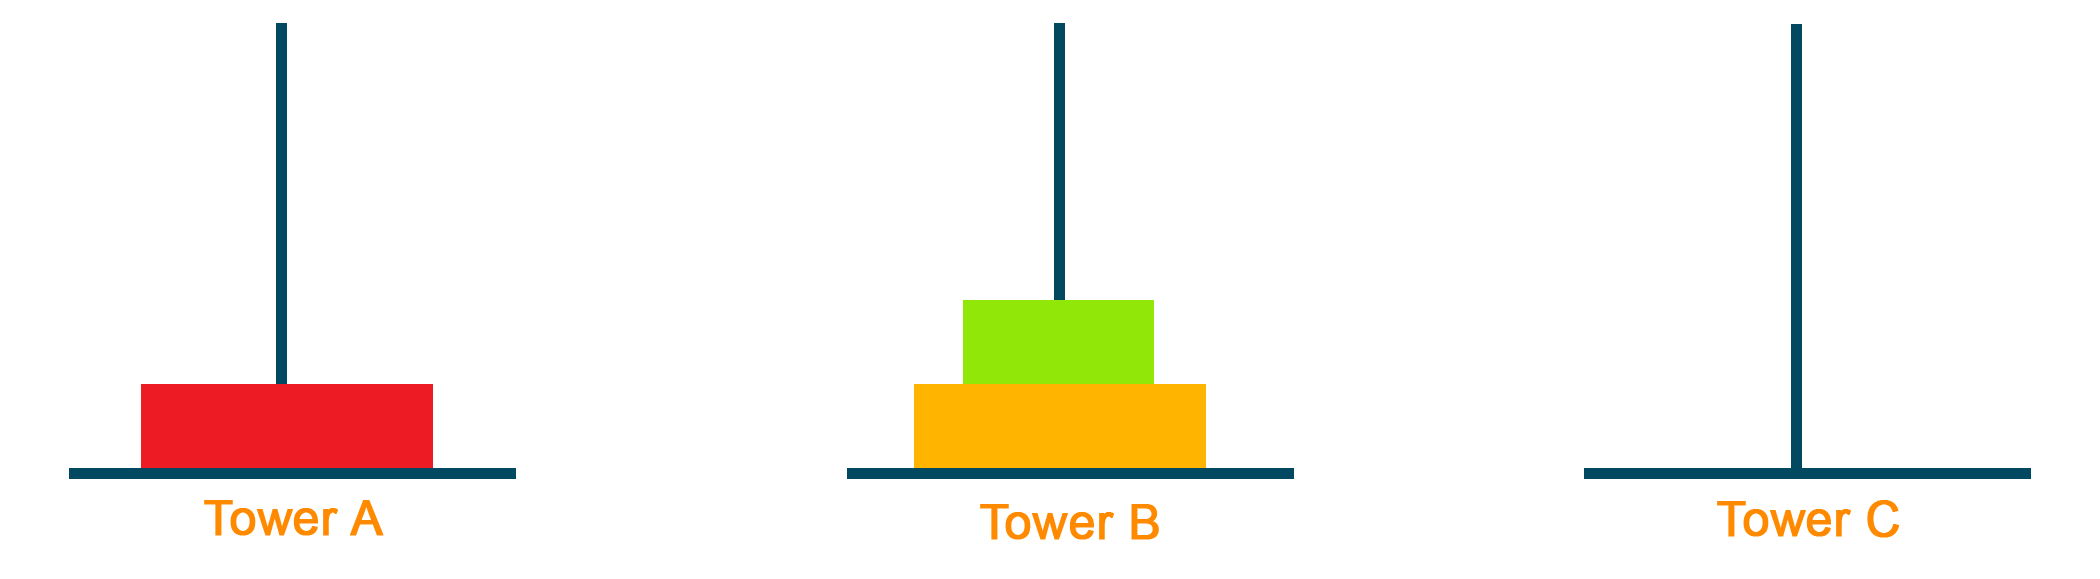 Replacing the smallest block over the middle block in Tower B